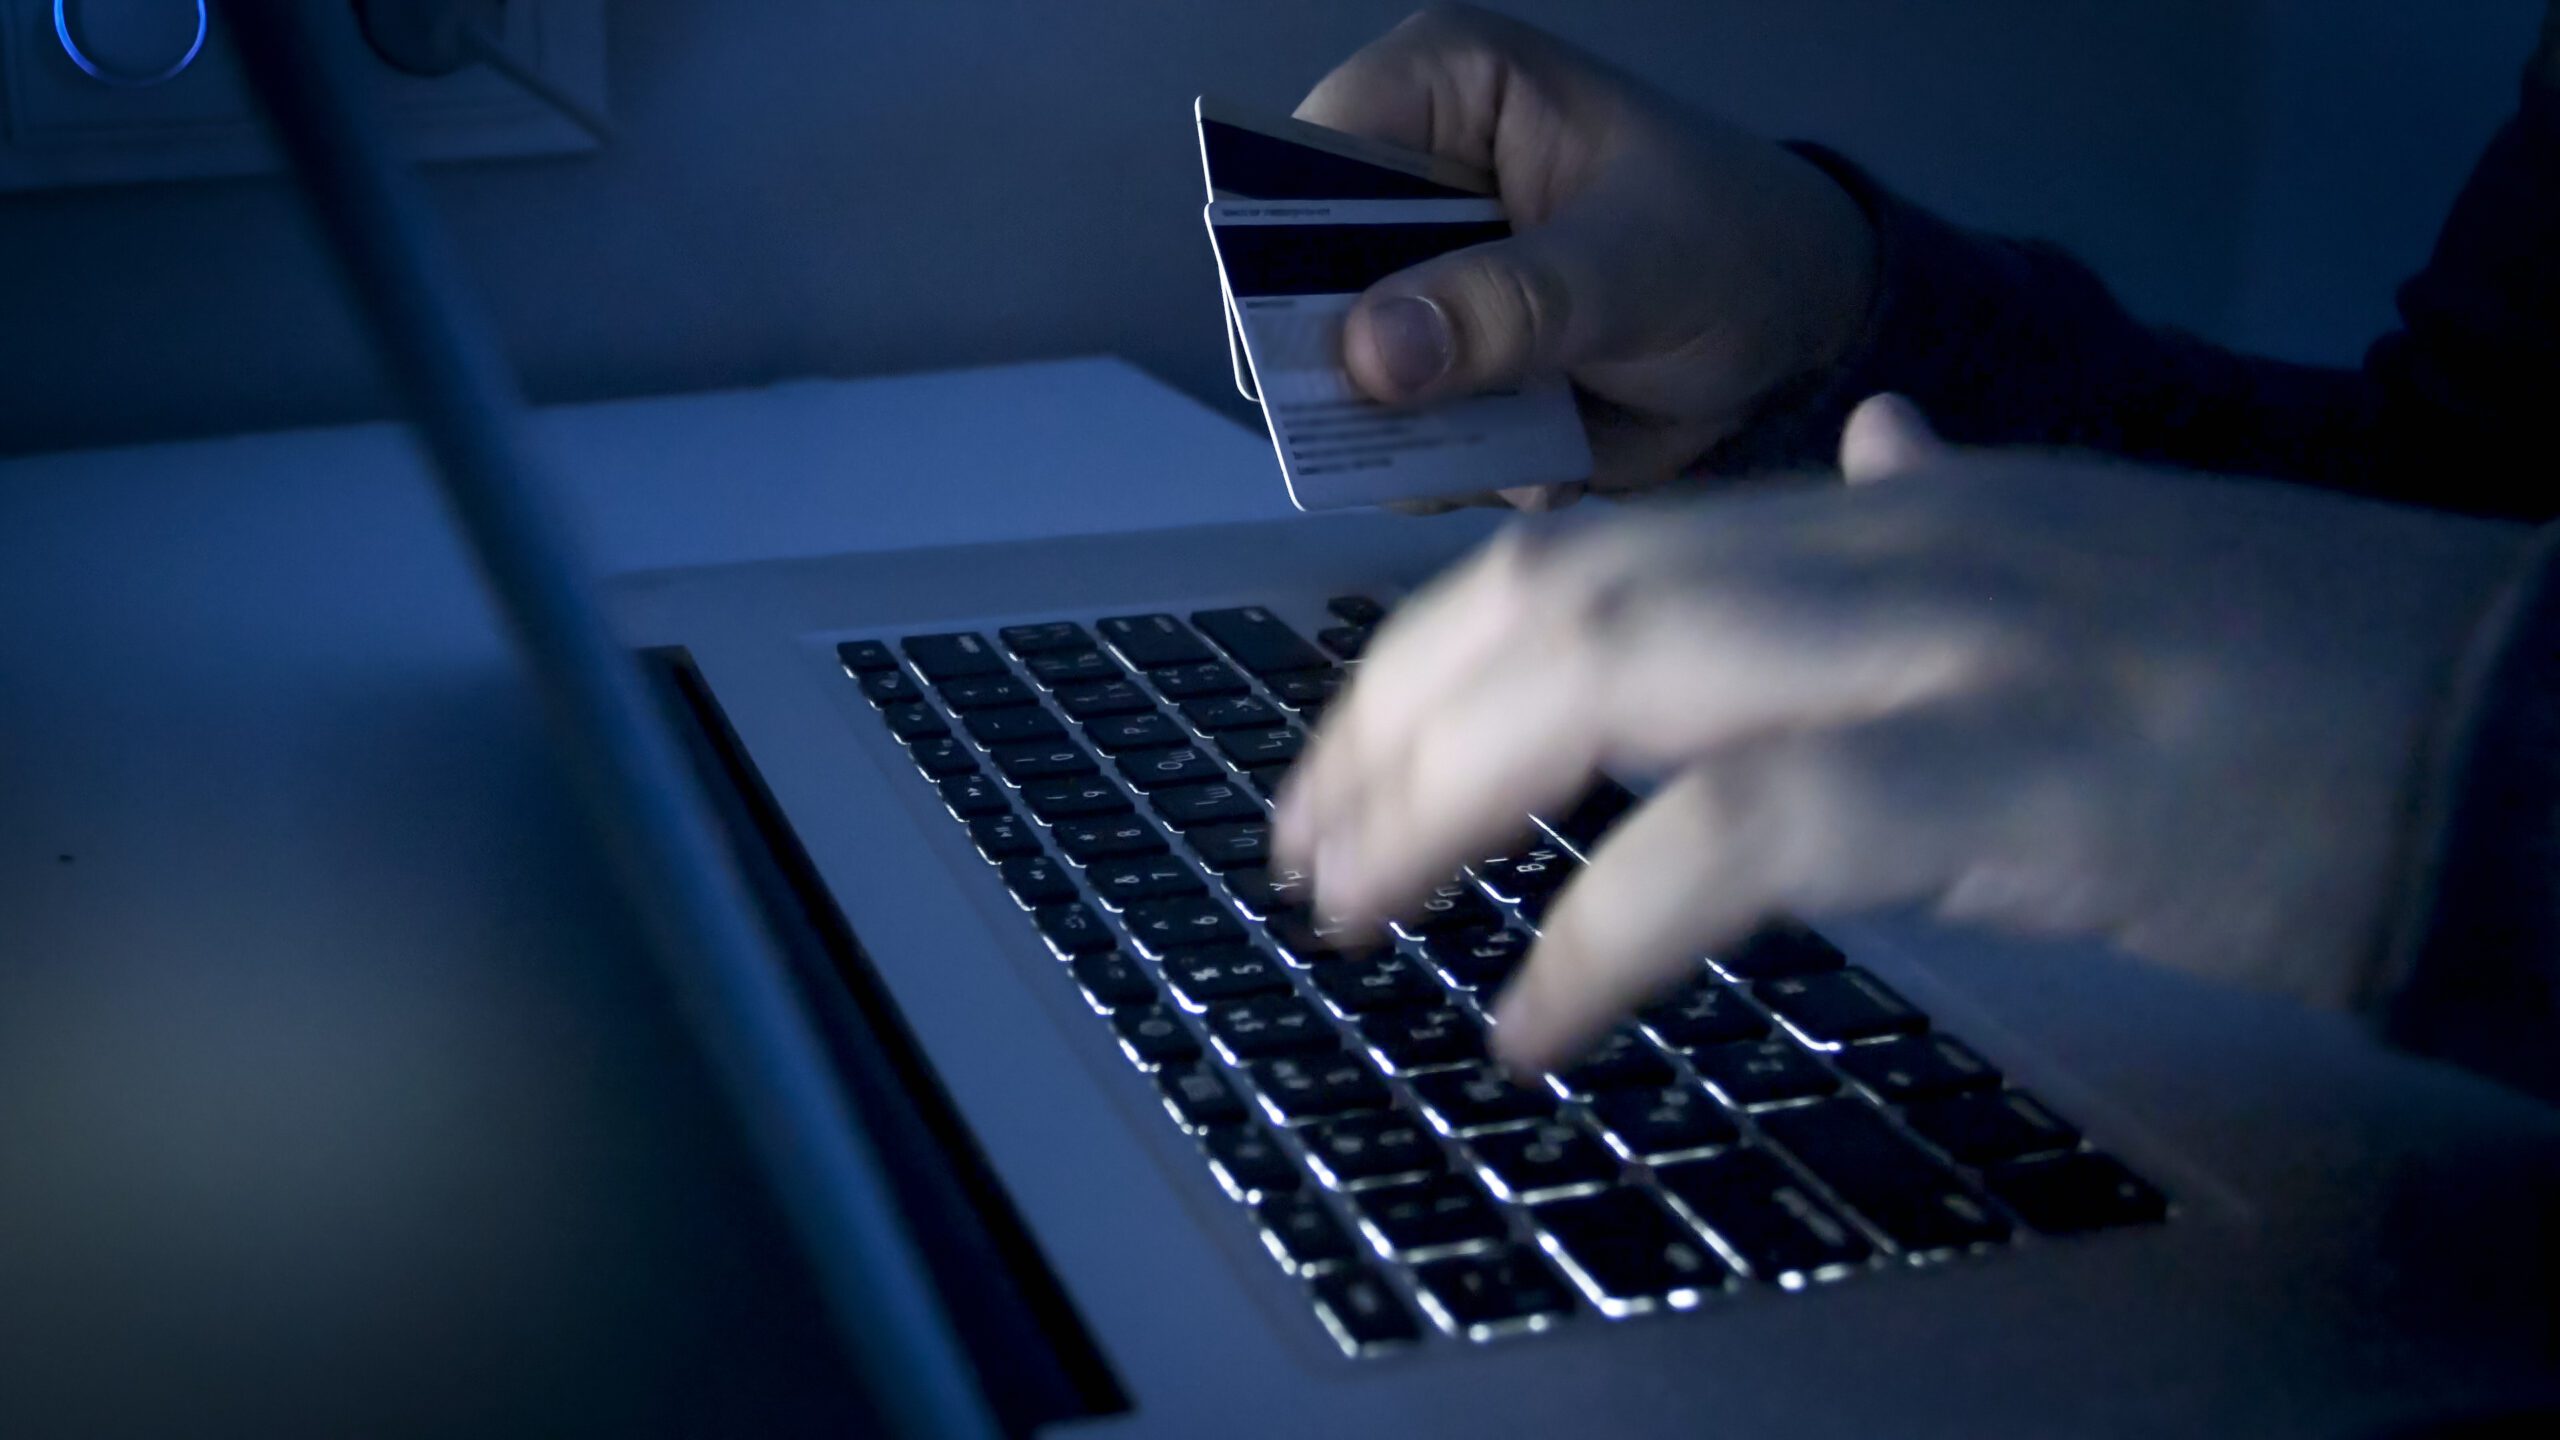 A close-up image of hands typing on a laptop keyboard, with one hand holding a credit card. The scene is dimly lit, creating a shadowy atmosphere. The focus is on the act of online shopping or entering payment information.